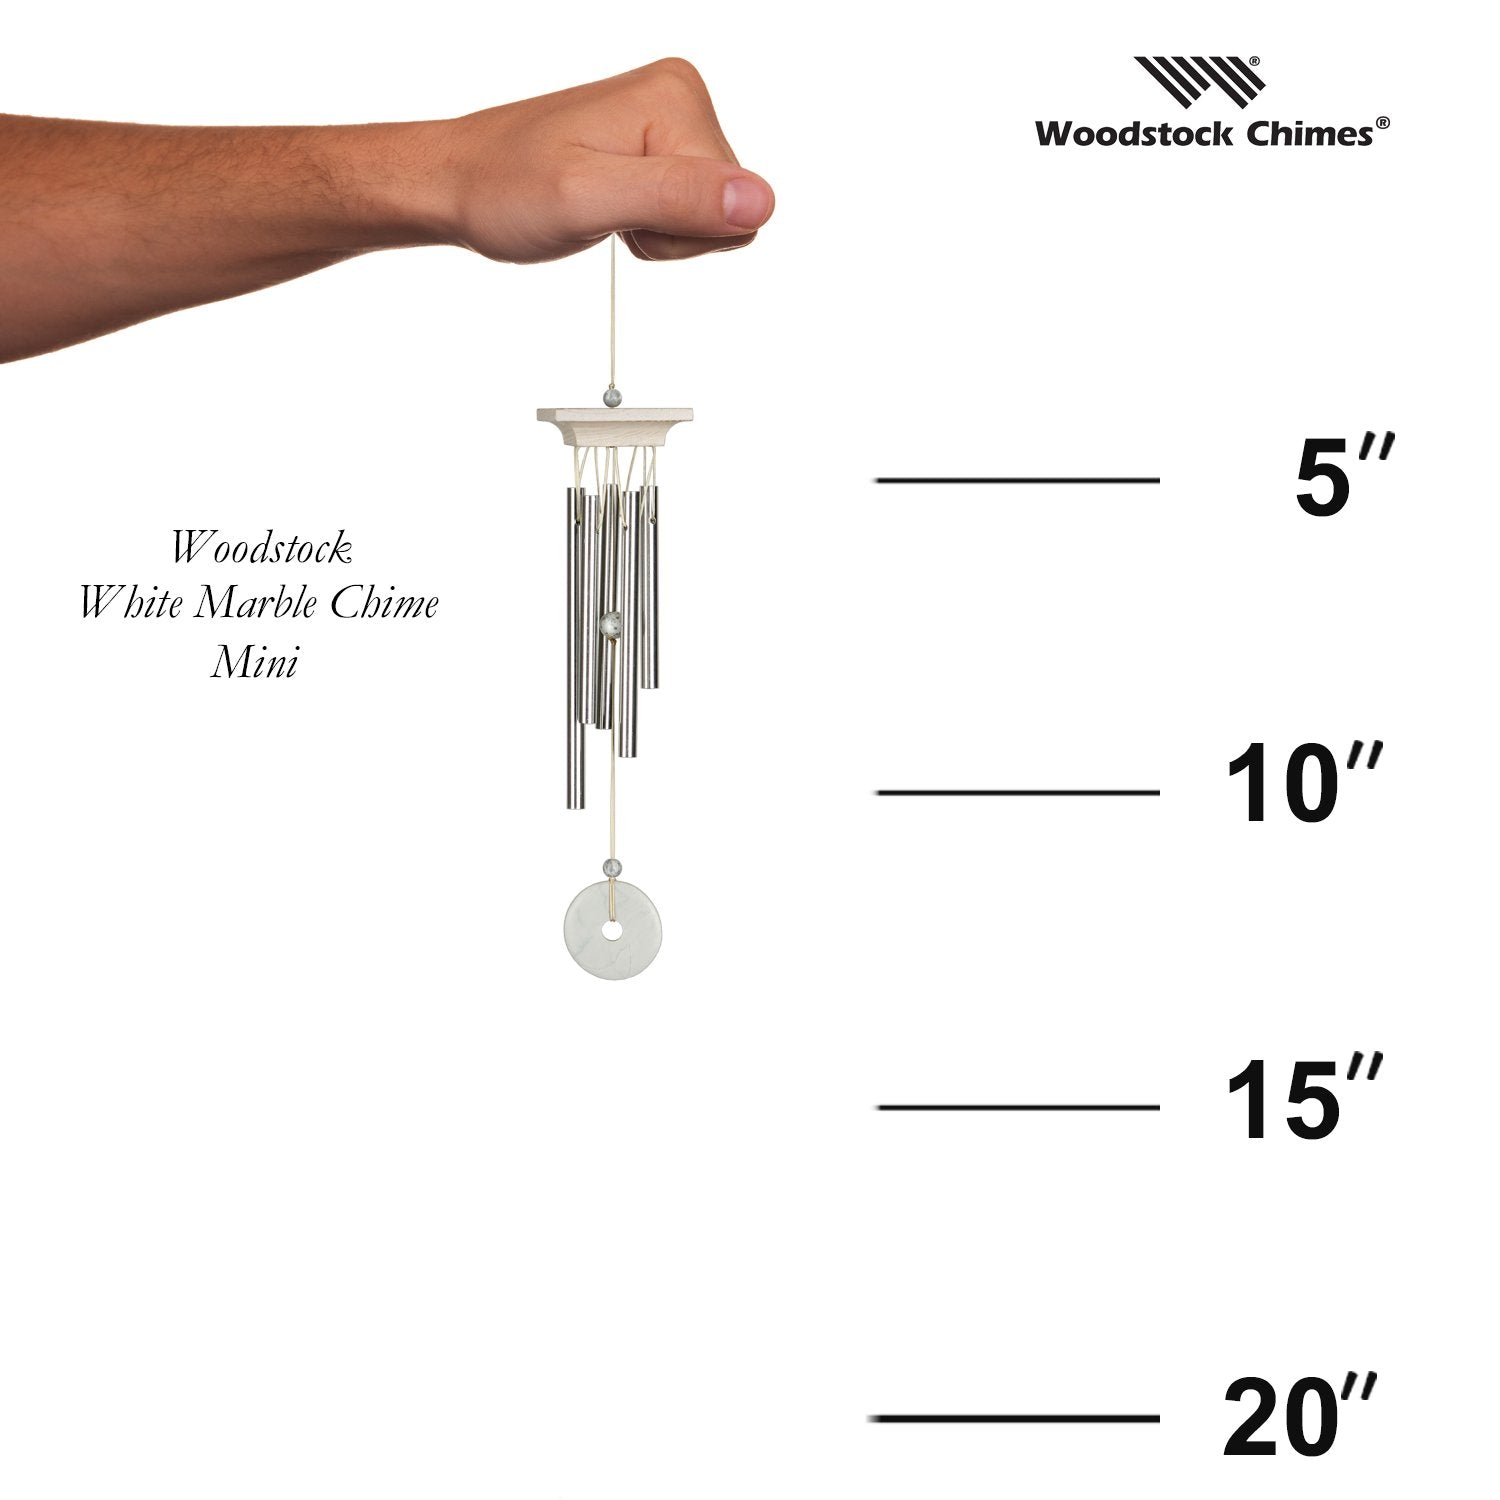 Woodstock White Marble Chime - Mini proportion image